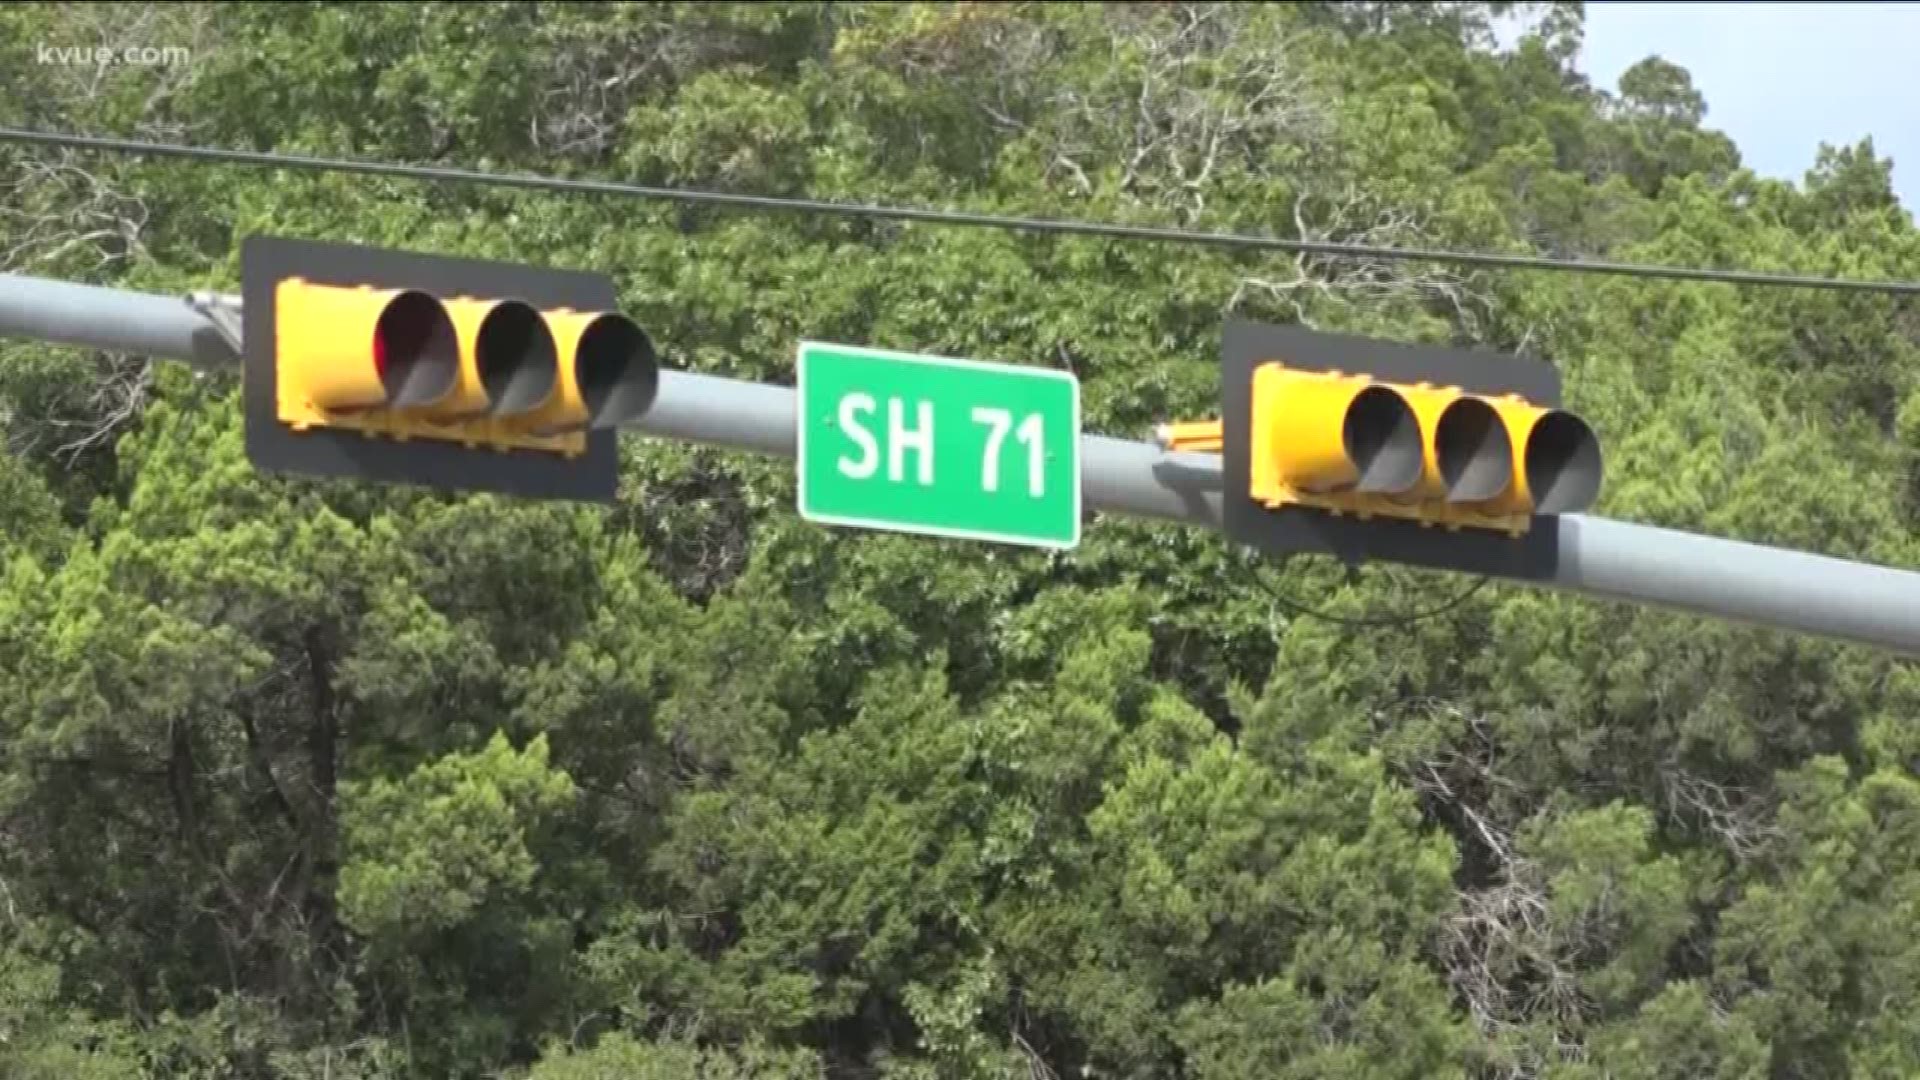 For a lot of families who live in western Travis County, State Highway 71 is their only way to get to work and school. And those families say the road is dangerous.